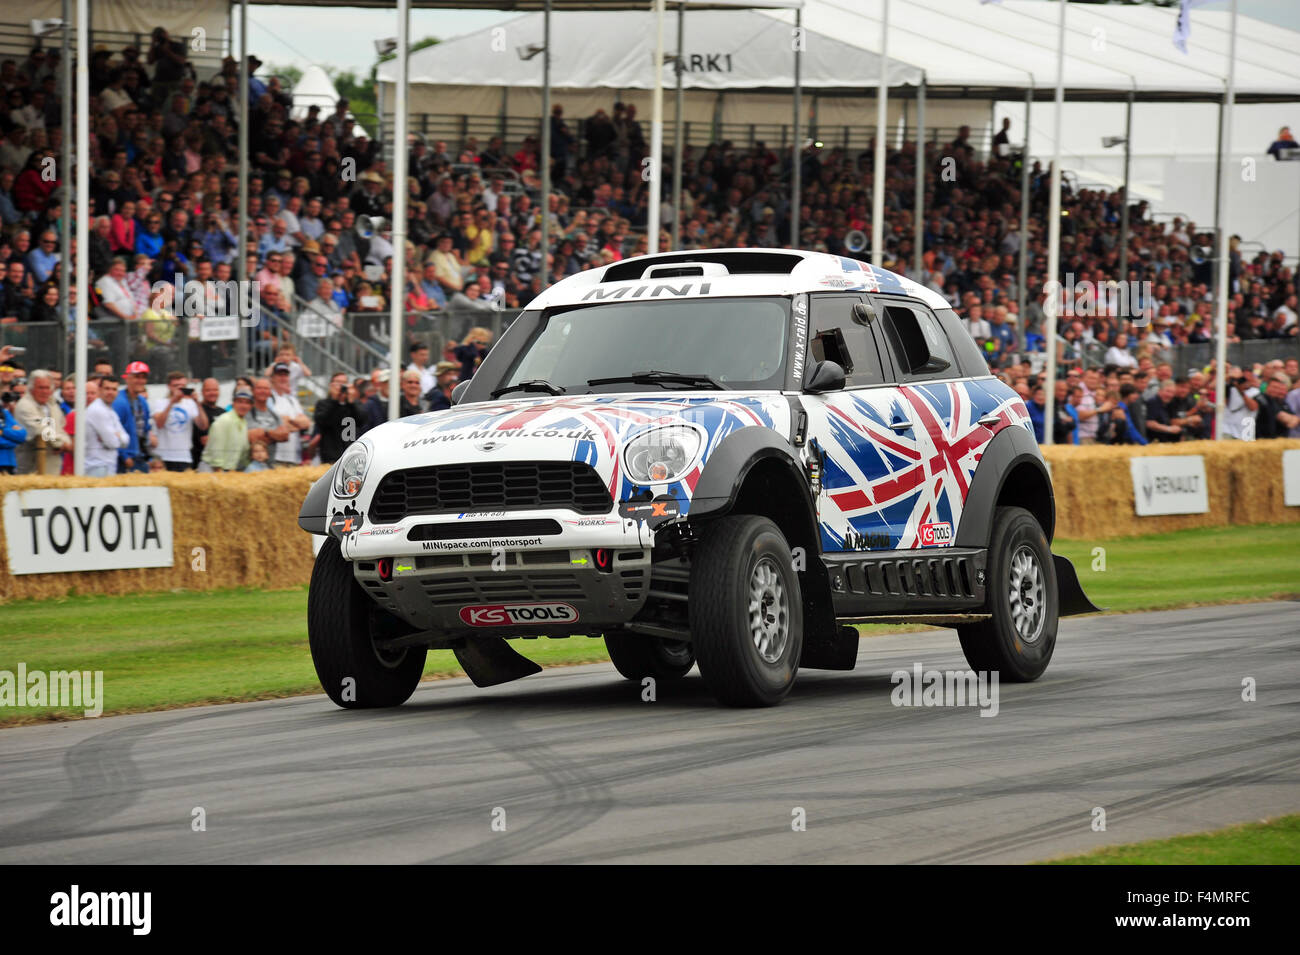 A 2015 Mini Cooper Countryman All4 Racing car at the Goodwood Festival of Speed in the UK. Stock Photo